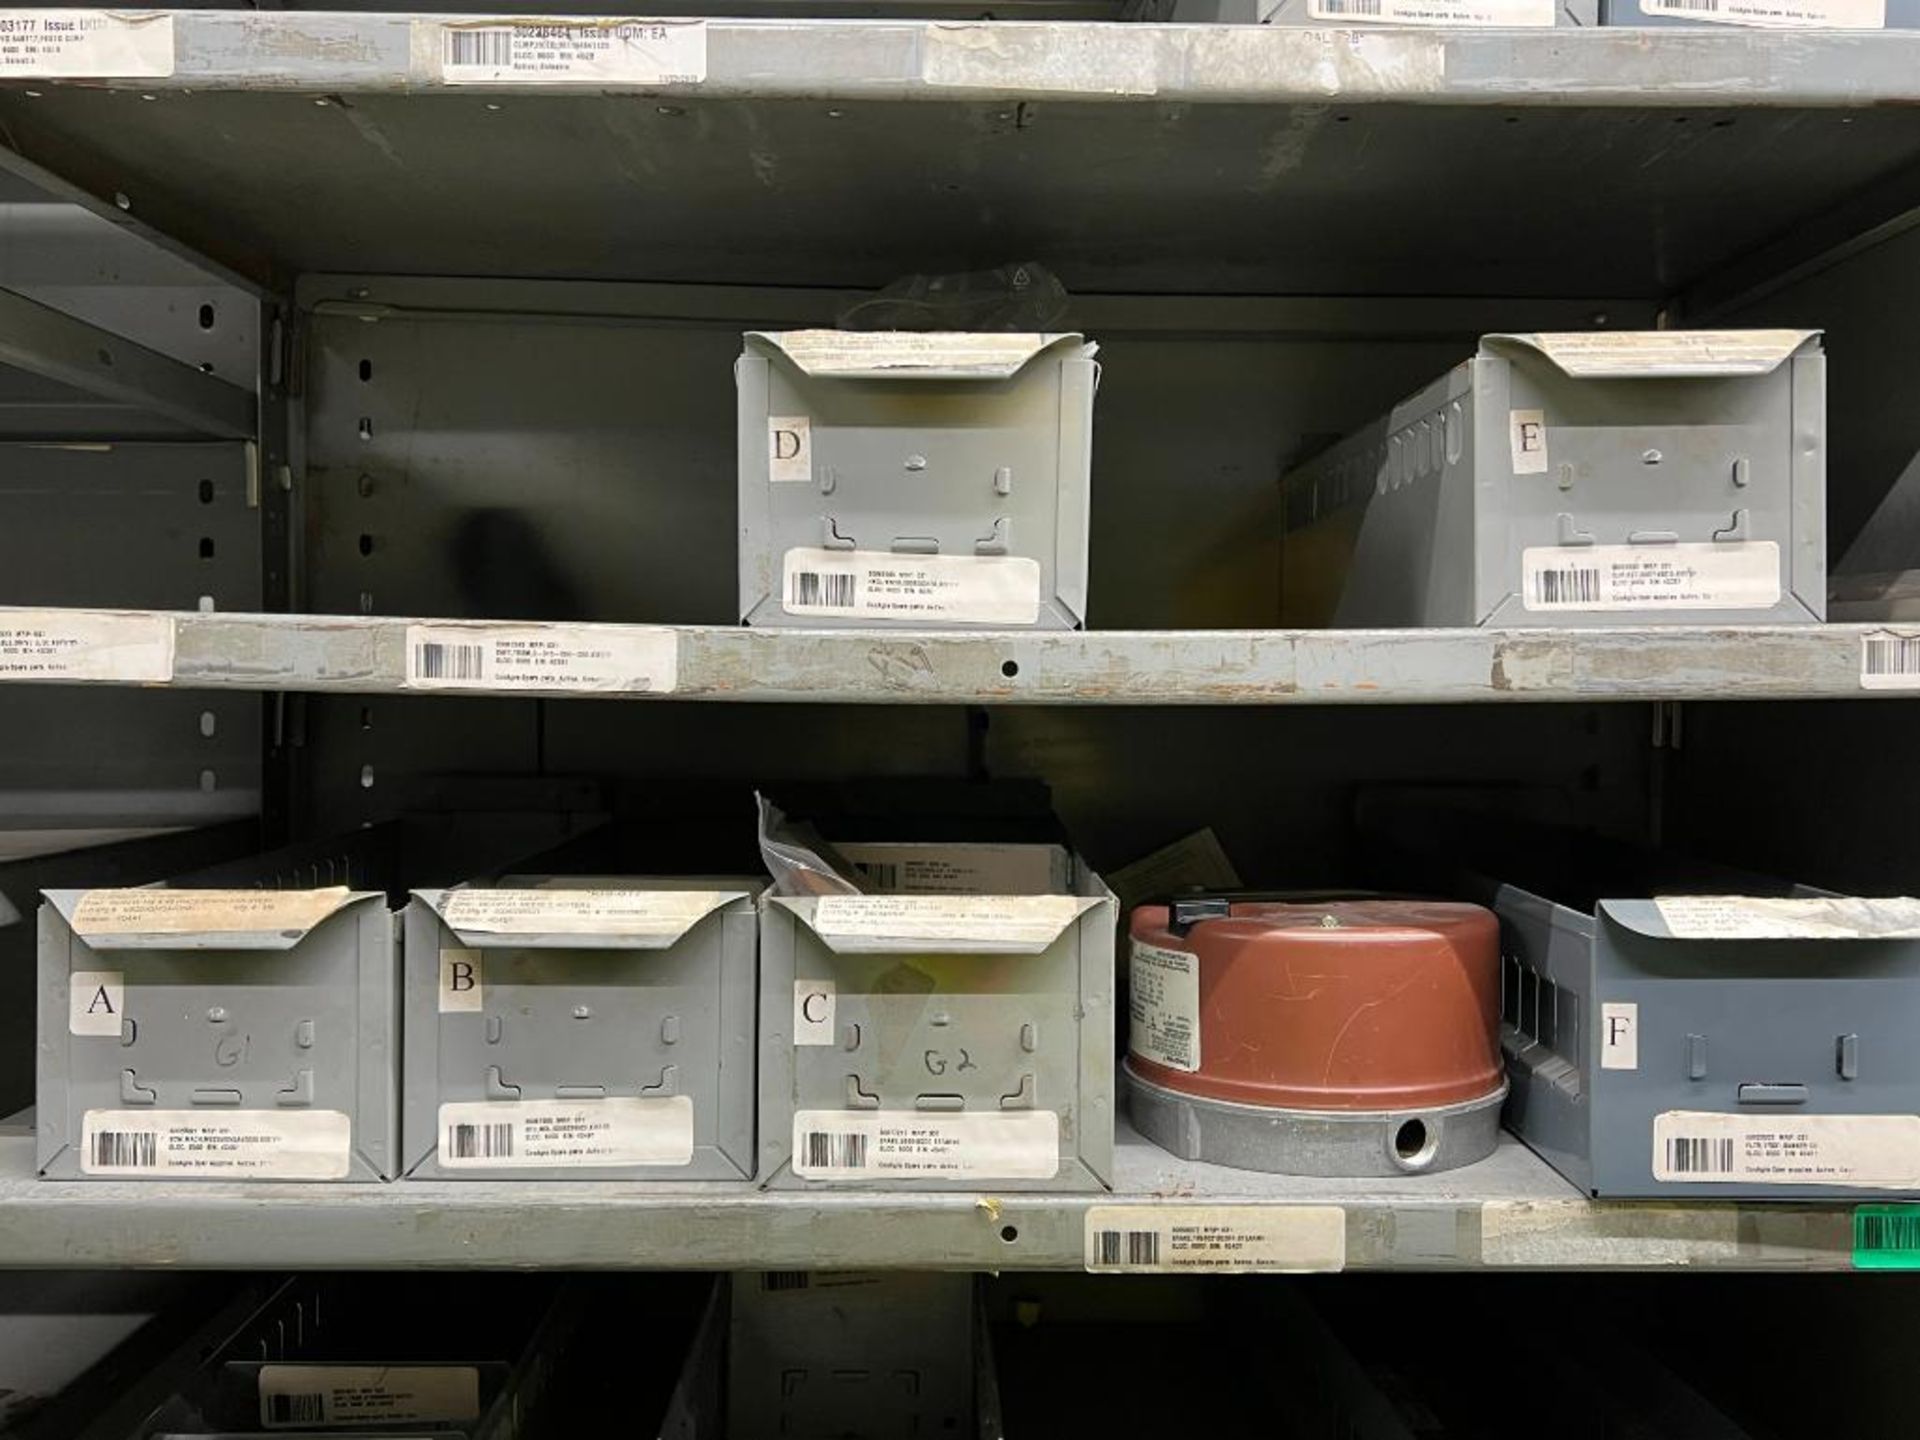 contents of gray shelving units to include, bearings, shafts, filters, fuses, pneumatic scale parts, - Image 34 of 141